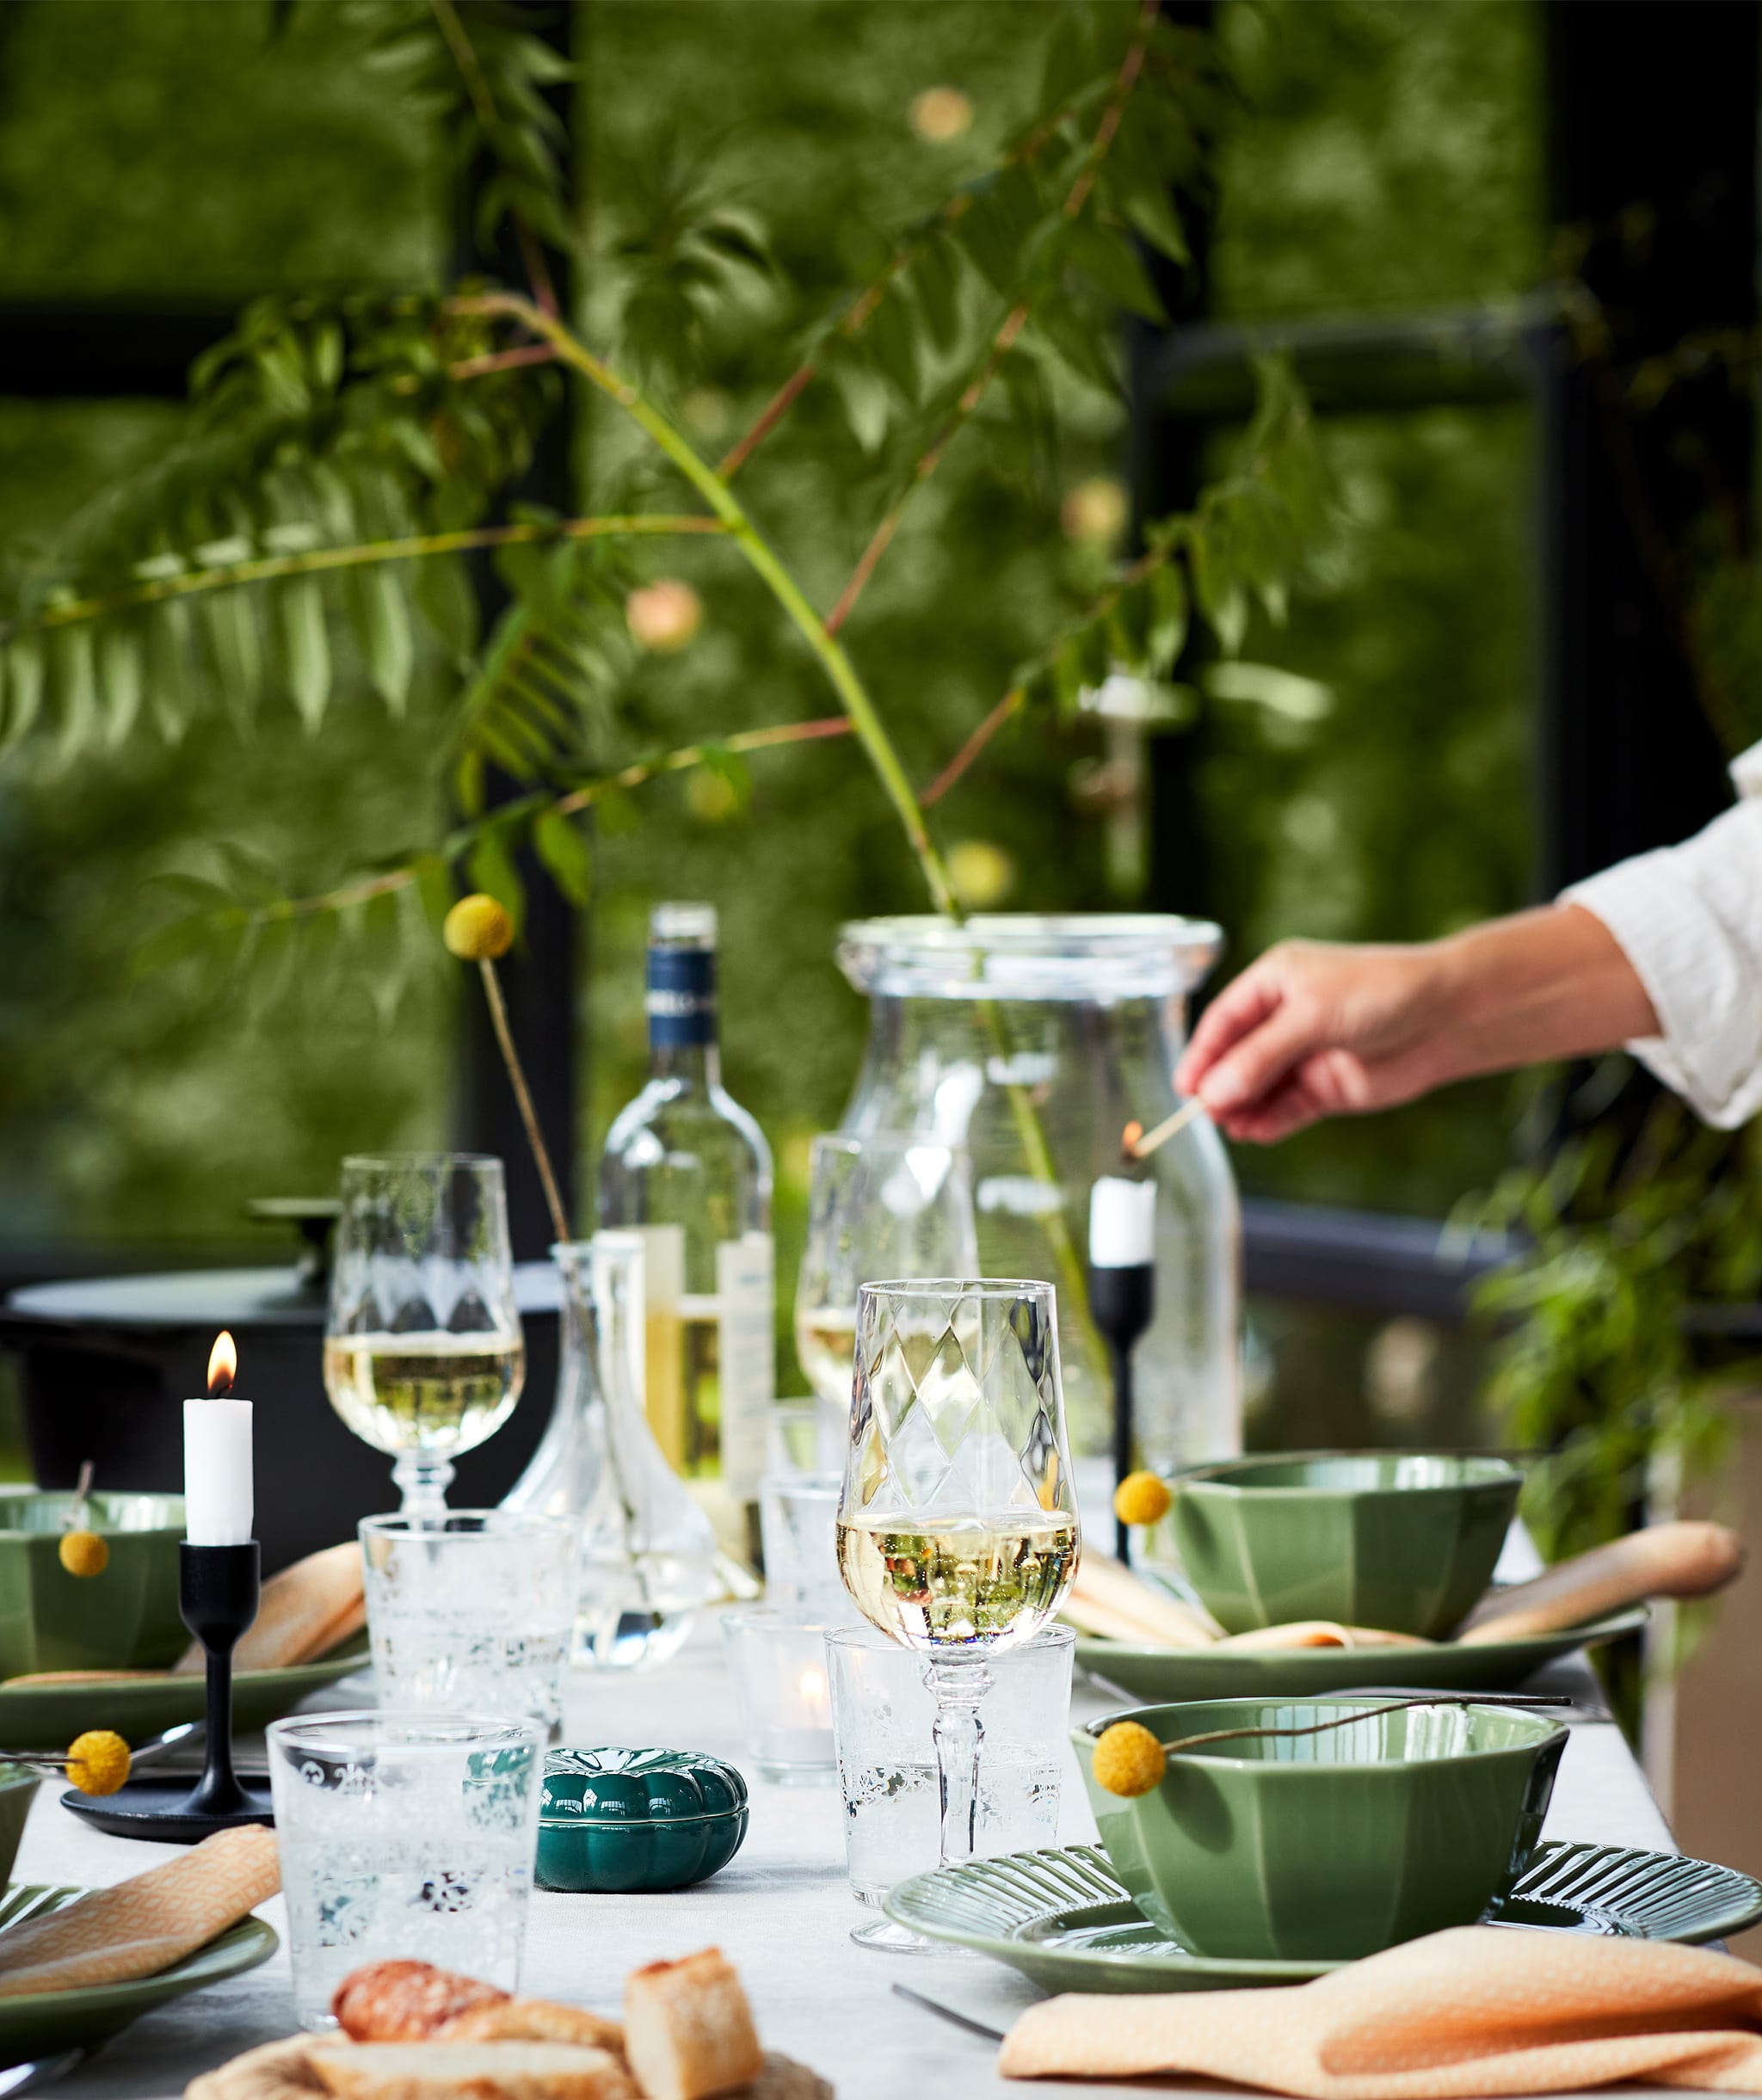 A well-laid table set for a dinner outdoors with green plates, wine glasses, candles and lots more. Shown with nature.